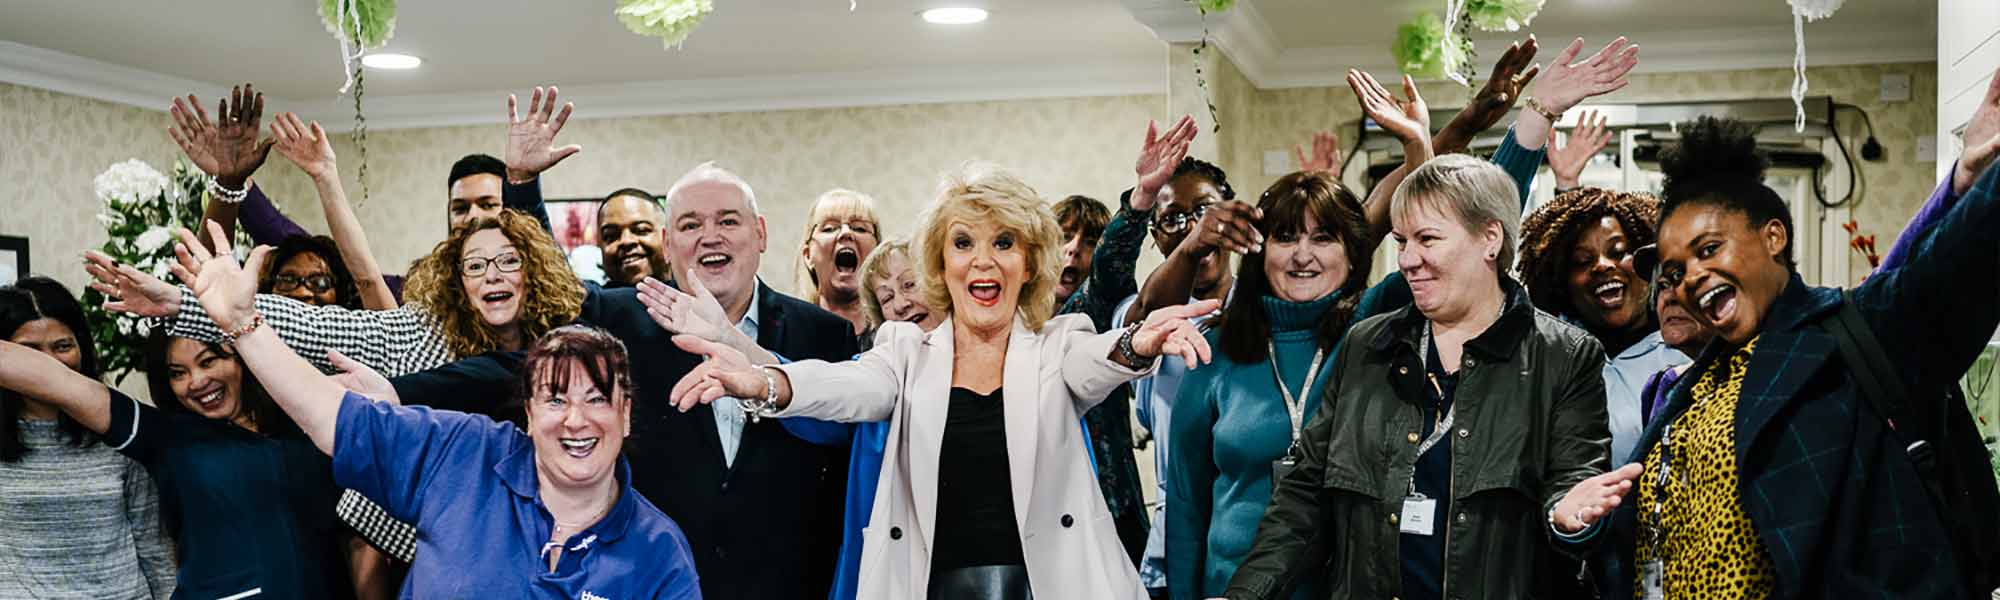 Birchwood-Grange-Invite-Sherrie-Hewson-to-Official-Opening-March-2019-banner-image